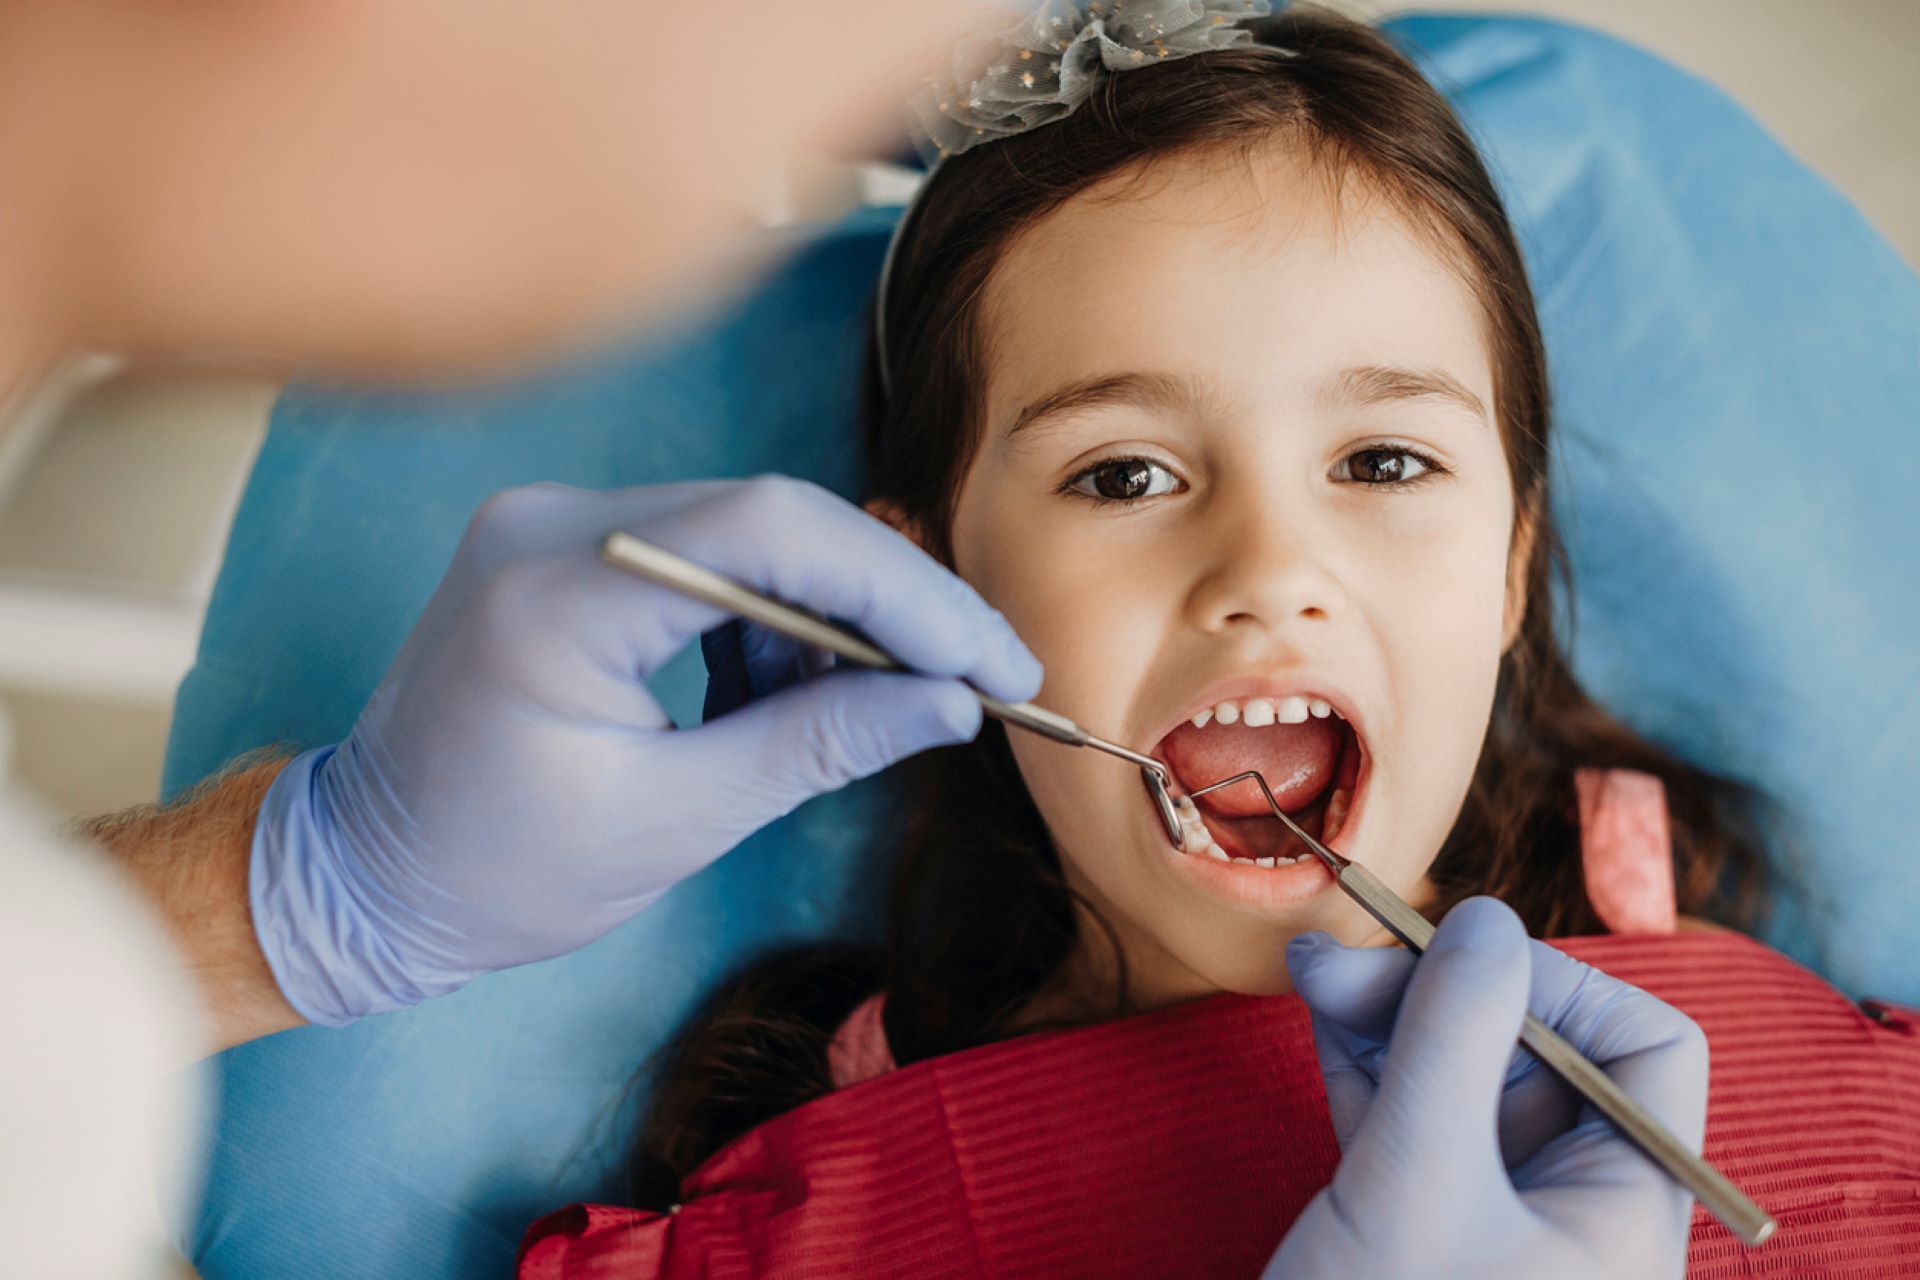 Young girl looking at camera during dentist appointment, dentist's hands with blue gloves